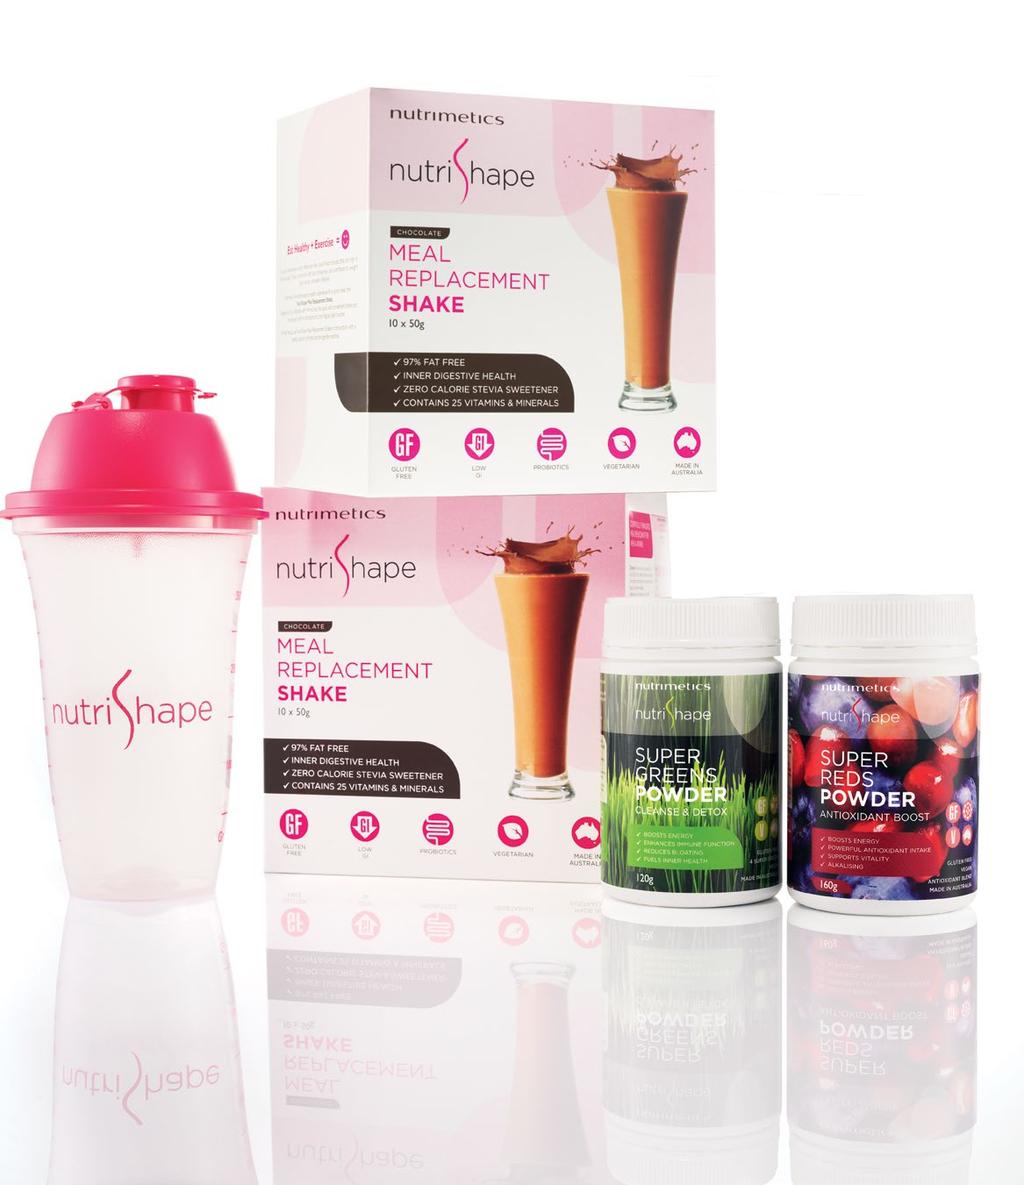 Kick start your health and confidence FREE NutriShape Shaker # Valued at 15.